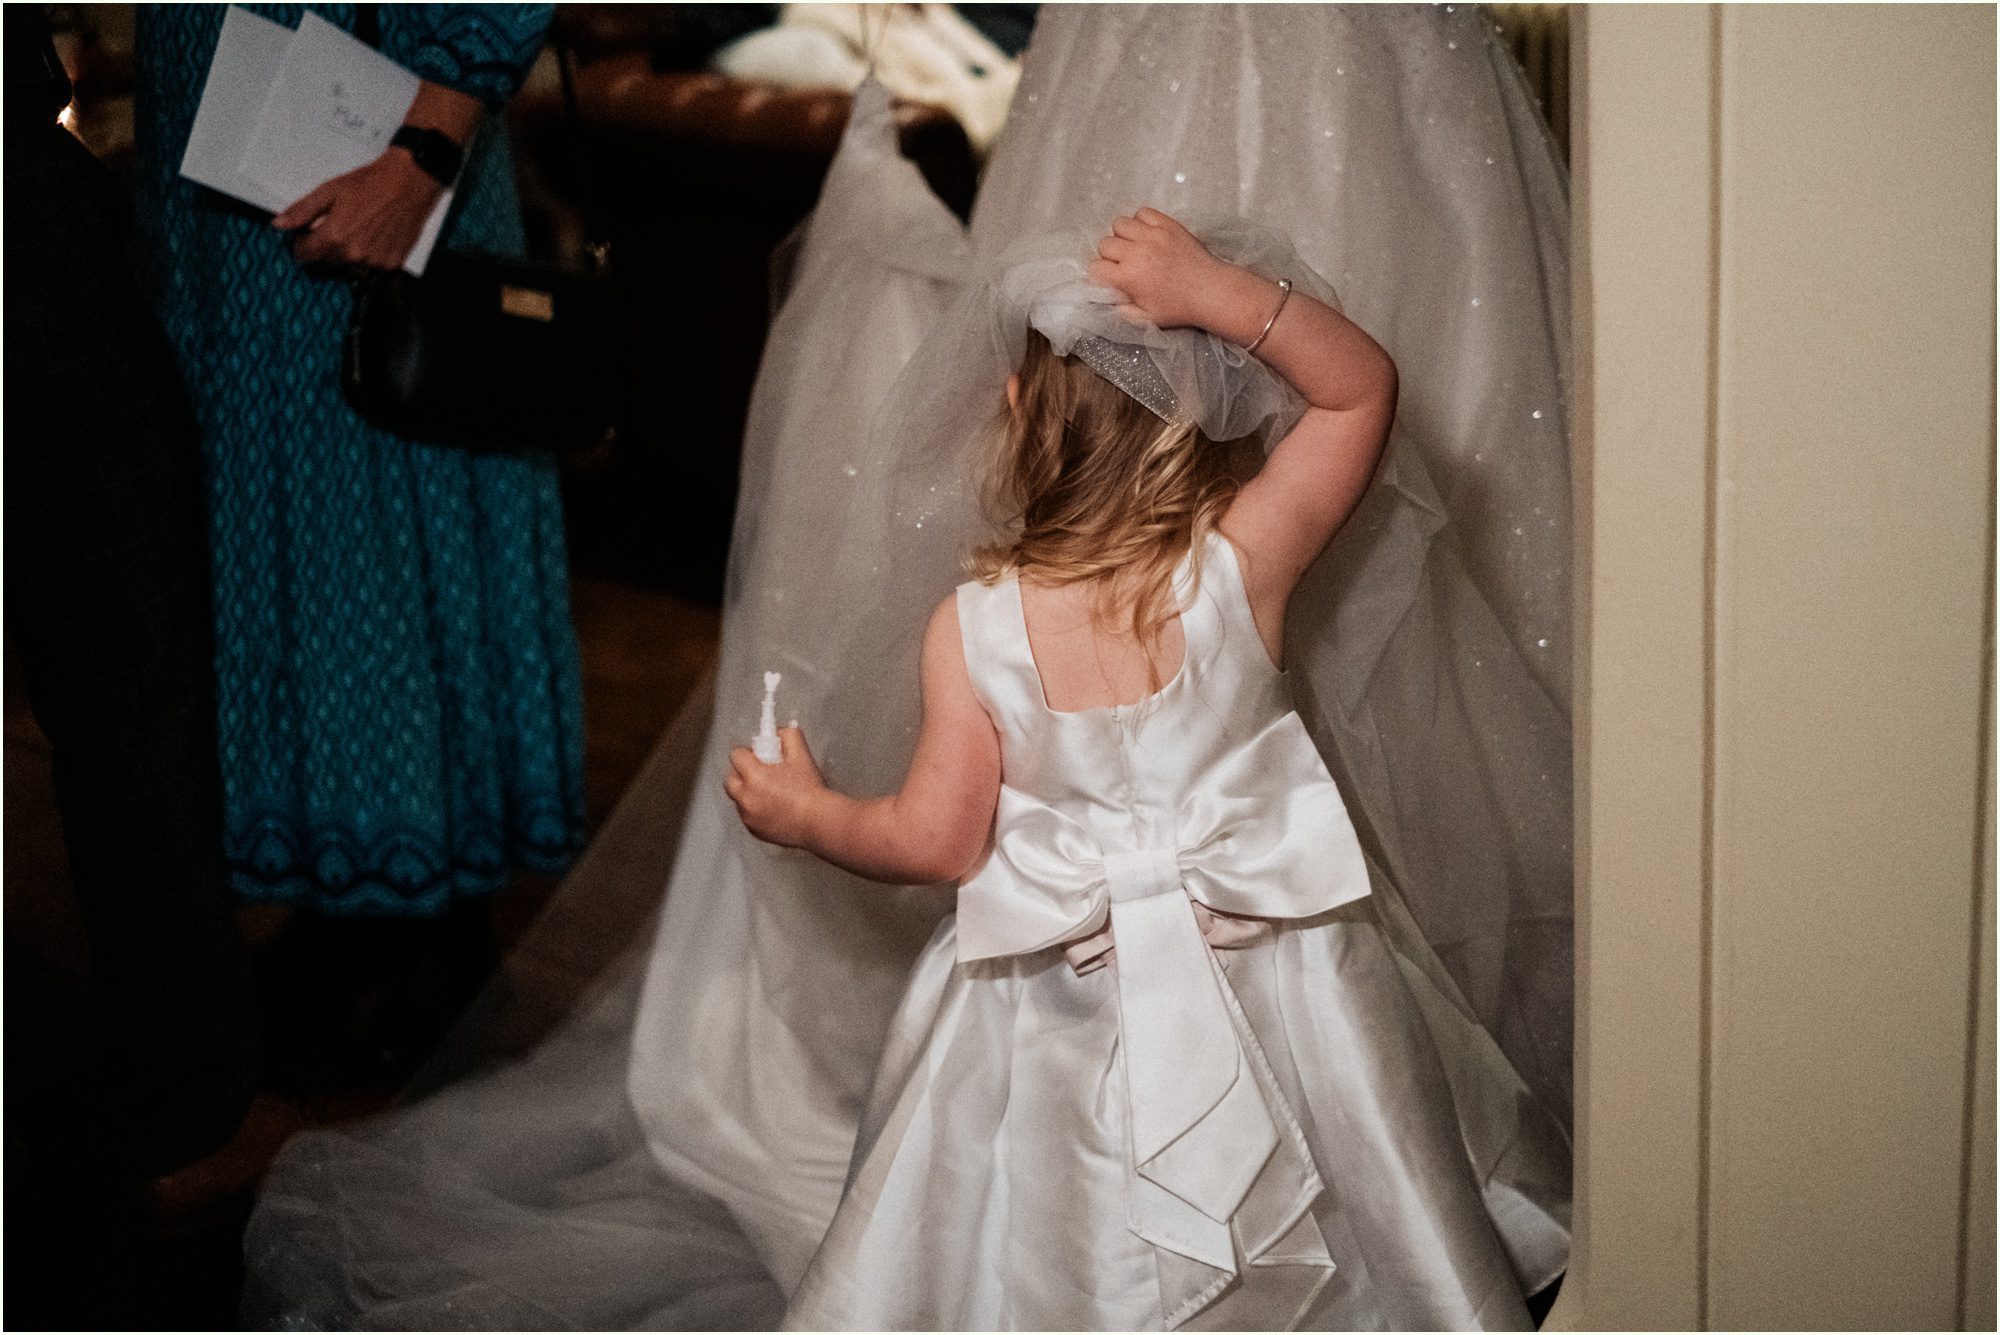 Younger photography weddings at St Elizabeth's House